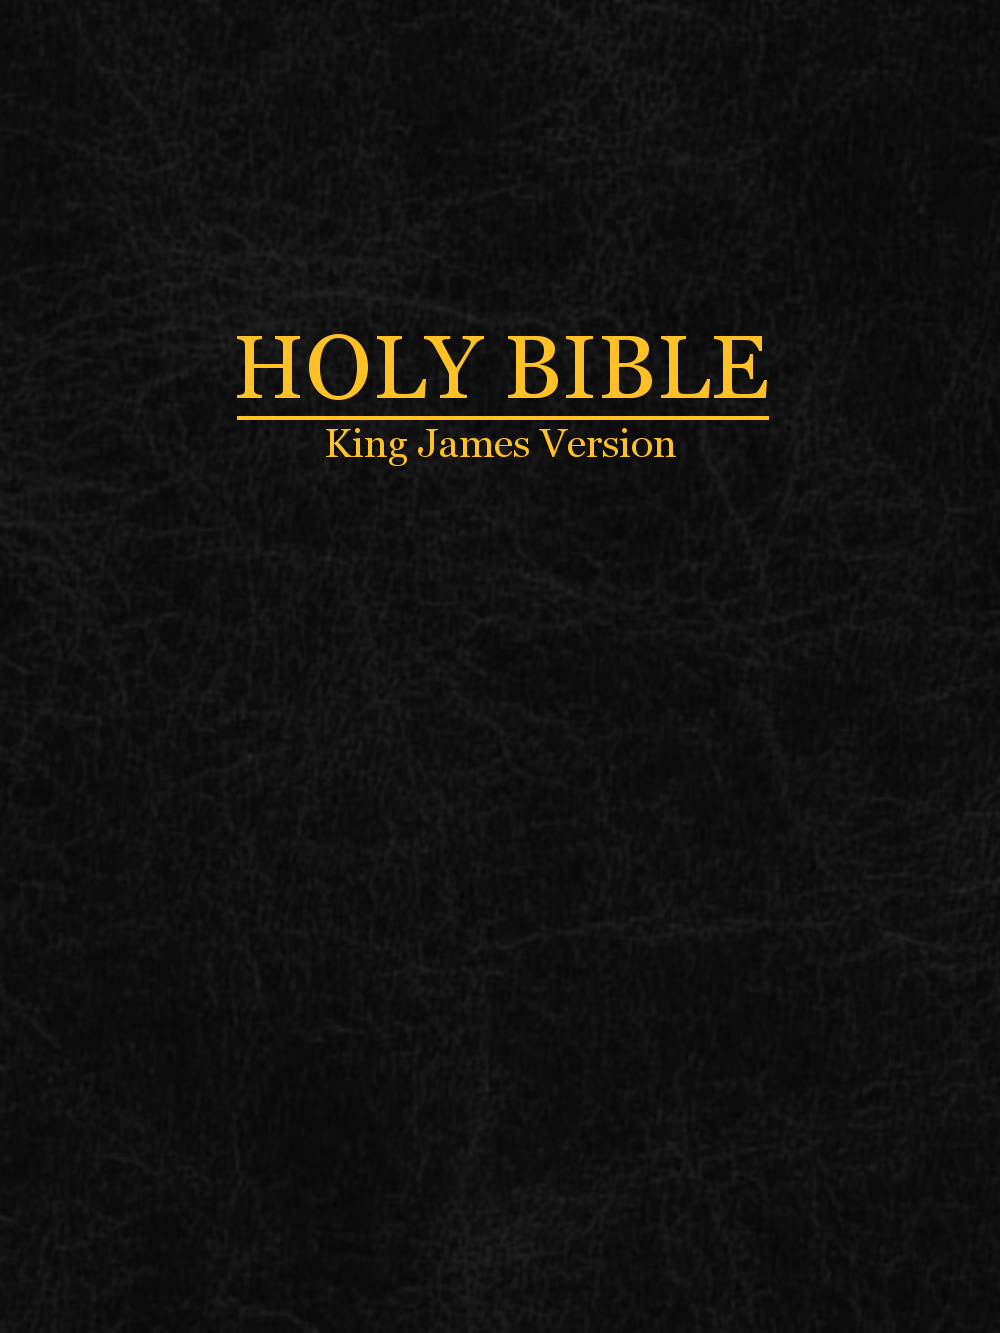 New King James Version Bible Download For Mobile Phone